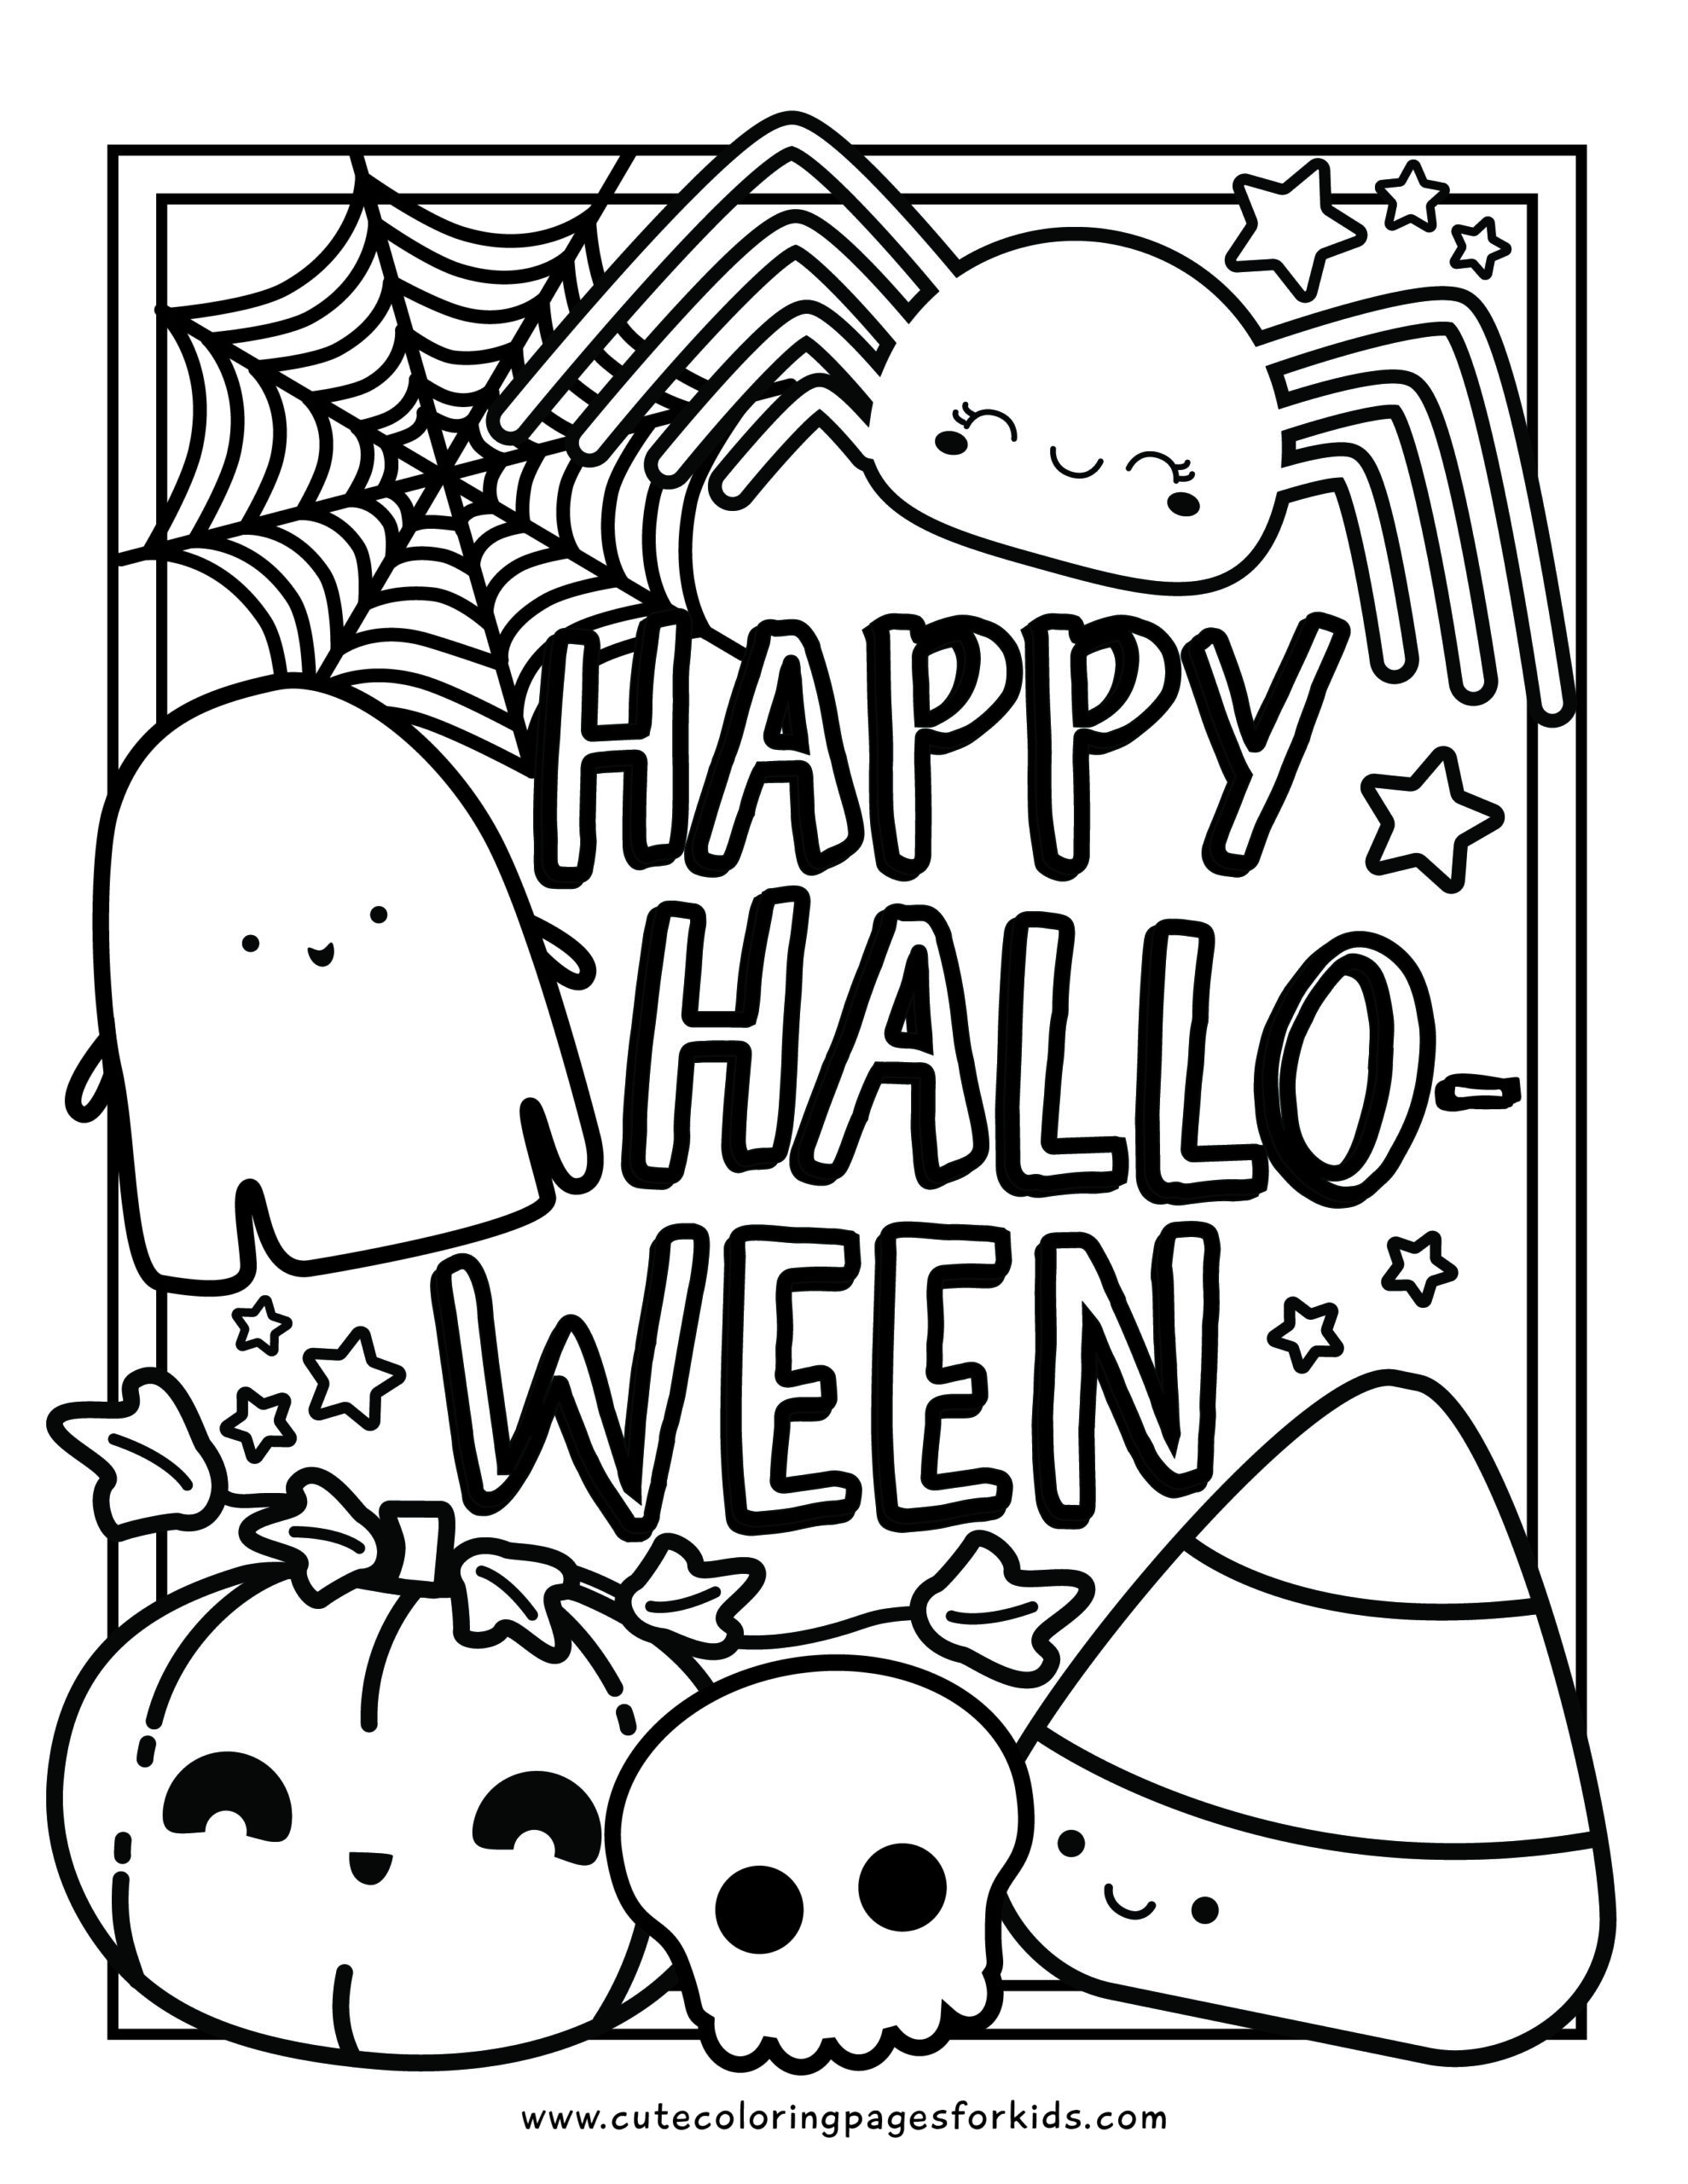 FREE Halloween Coloring Pages {CUTE!} - A Country Girl's Life